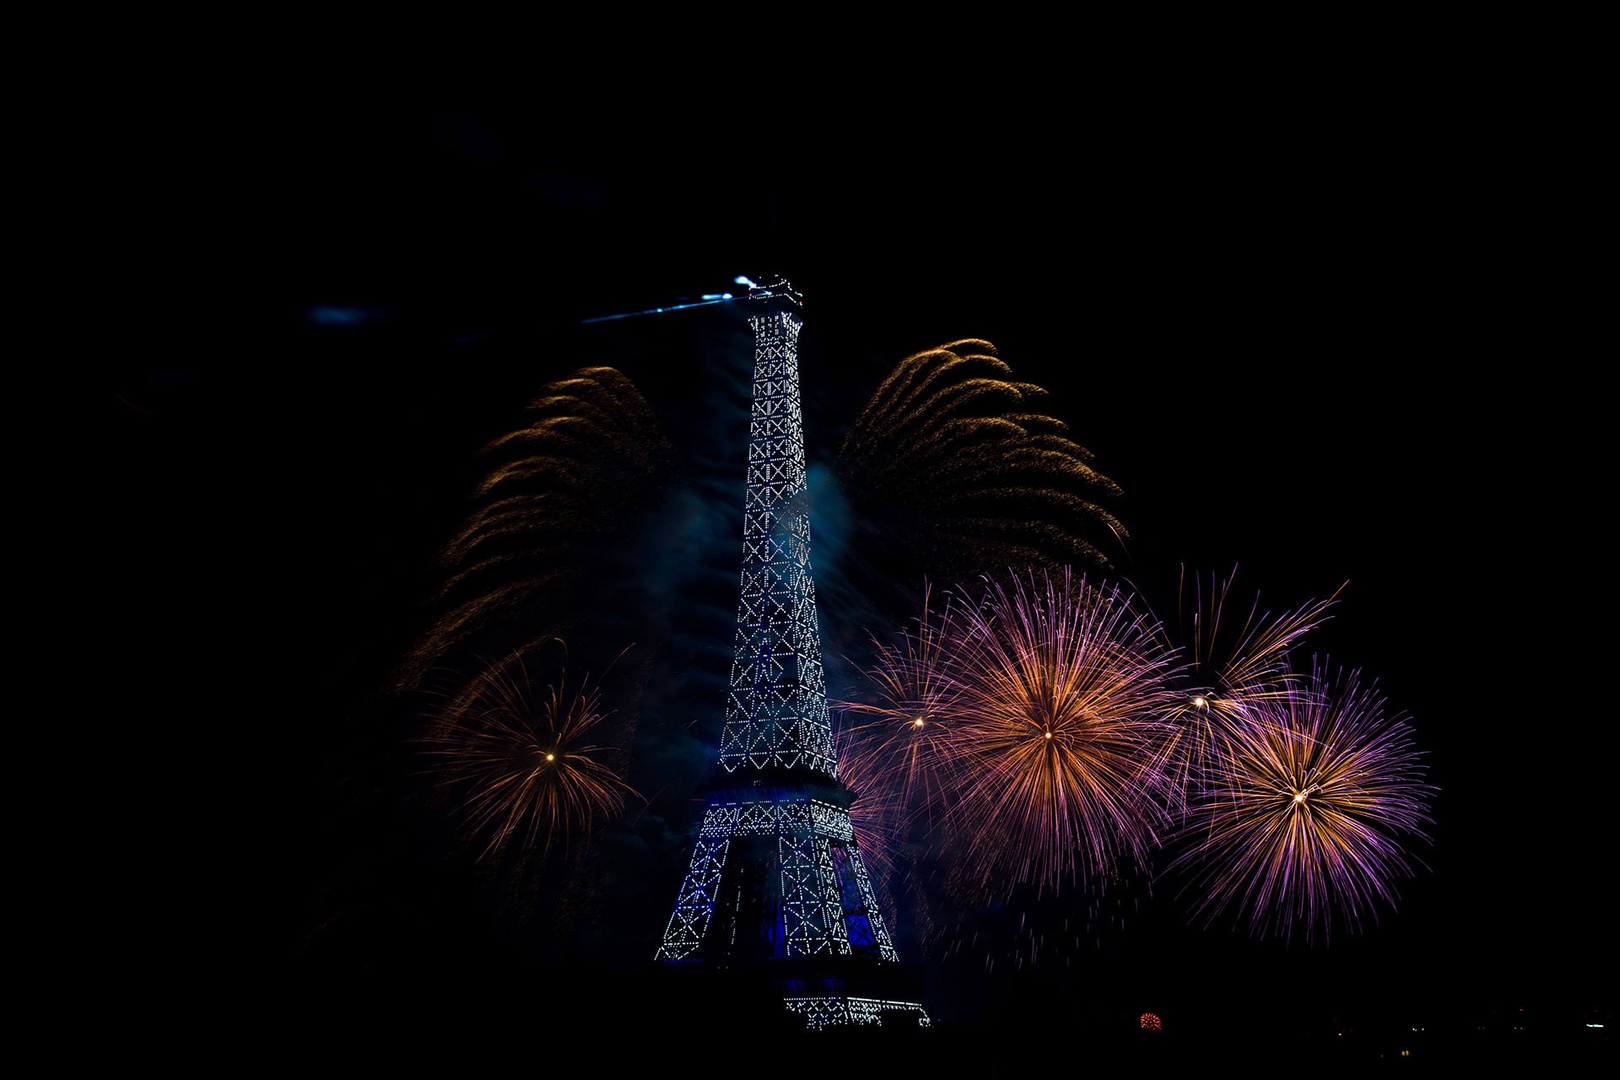 World class view of the Bastille day fireworks!